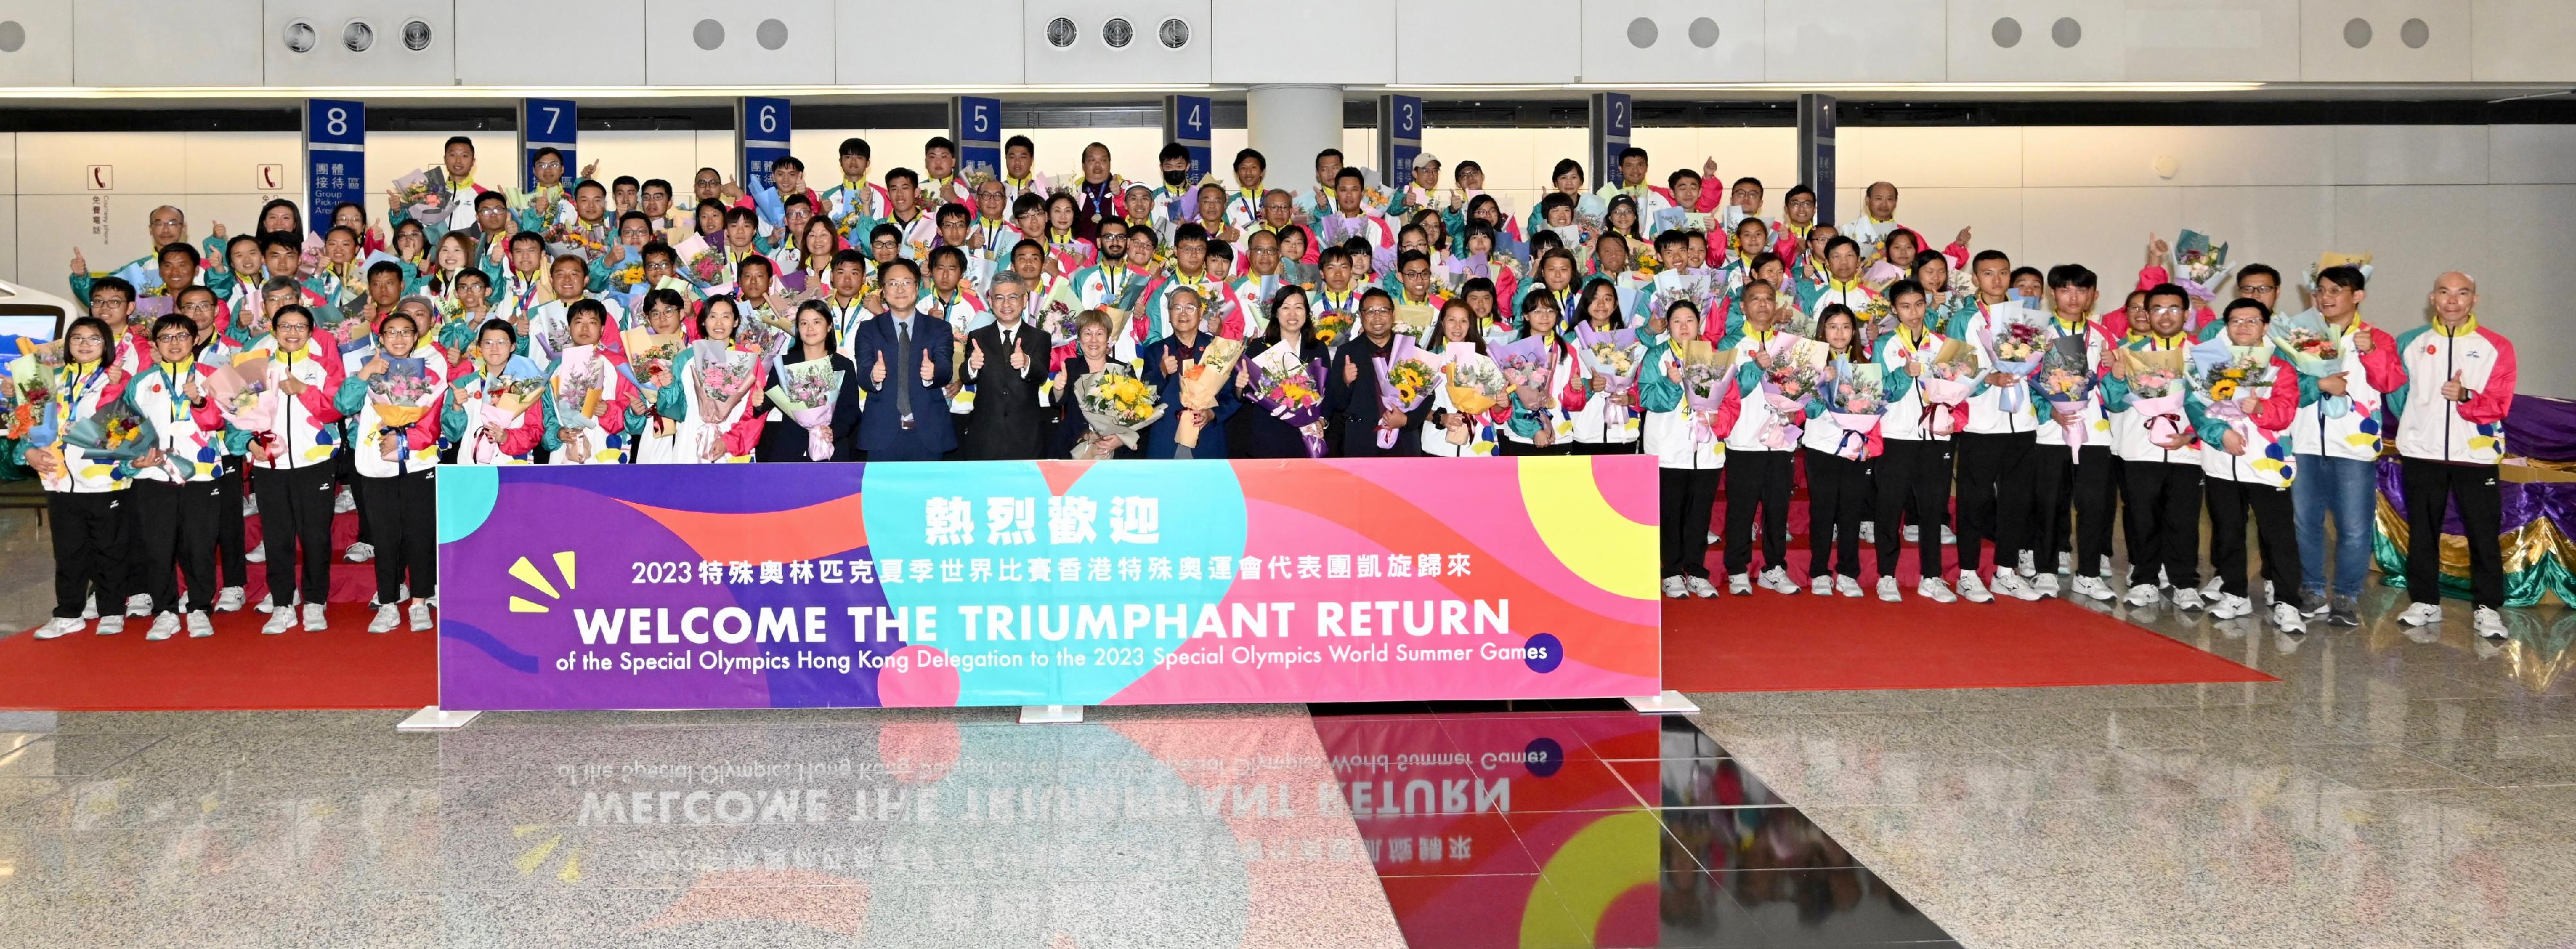 The Hong Kong Special Administrative Region Government held a welcome home ceremony at Hong Kong International Airport today (June 27) to greet the Special Olympics Hong Kong Delegation on their triumphant return from the 2023 Special Olympics World Summer Games. Photo shows the Under Secretary for Culture, Sports and Tourism, Mr Raistlin Lau (front row, eleventh left); the President of the Special Olympics Hong Kong (HKSO), Mrs Laura Ling (front row, twelfth left); Assistant Director (Leisure Services) of the Leisure and Cultural Services Department Mr Benjamin Hung (front row, tenth left); the Vice-President of the HKSO, Mr Yeung Tak-wah (front row, thirteenth left); the Chairperson of the Executive Committee of the HKSO, Dr Evelyn Lam (front row, ninth left); the Head of Delegation, Dr Peggy Choi (front row, thirteenth right); Deputy Heads of Delegation Mr Dave Ho (front row, twelfth right) and Dr Allison Wong (front row, eighth left), and the athletes at the welcome home ceremony.